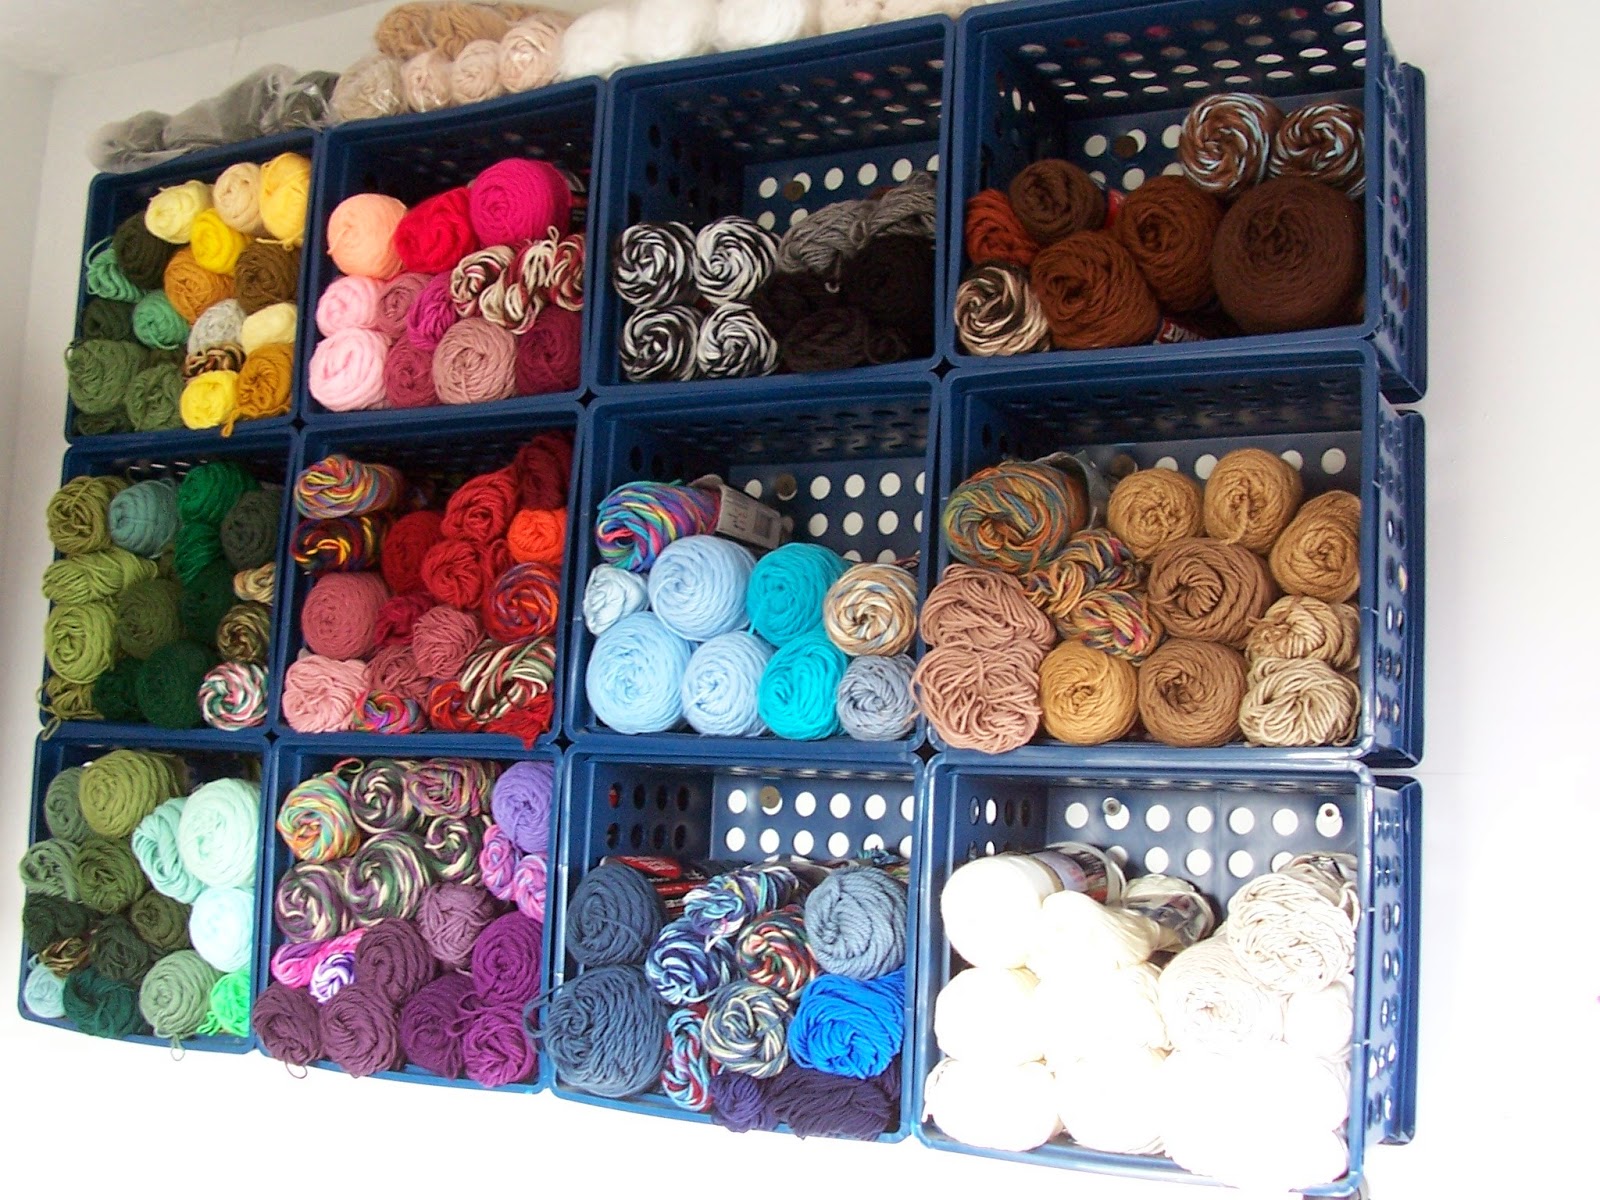 Finally found some good yarn storage for my stash! Now I only need